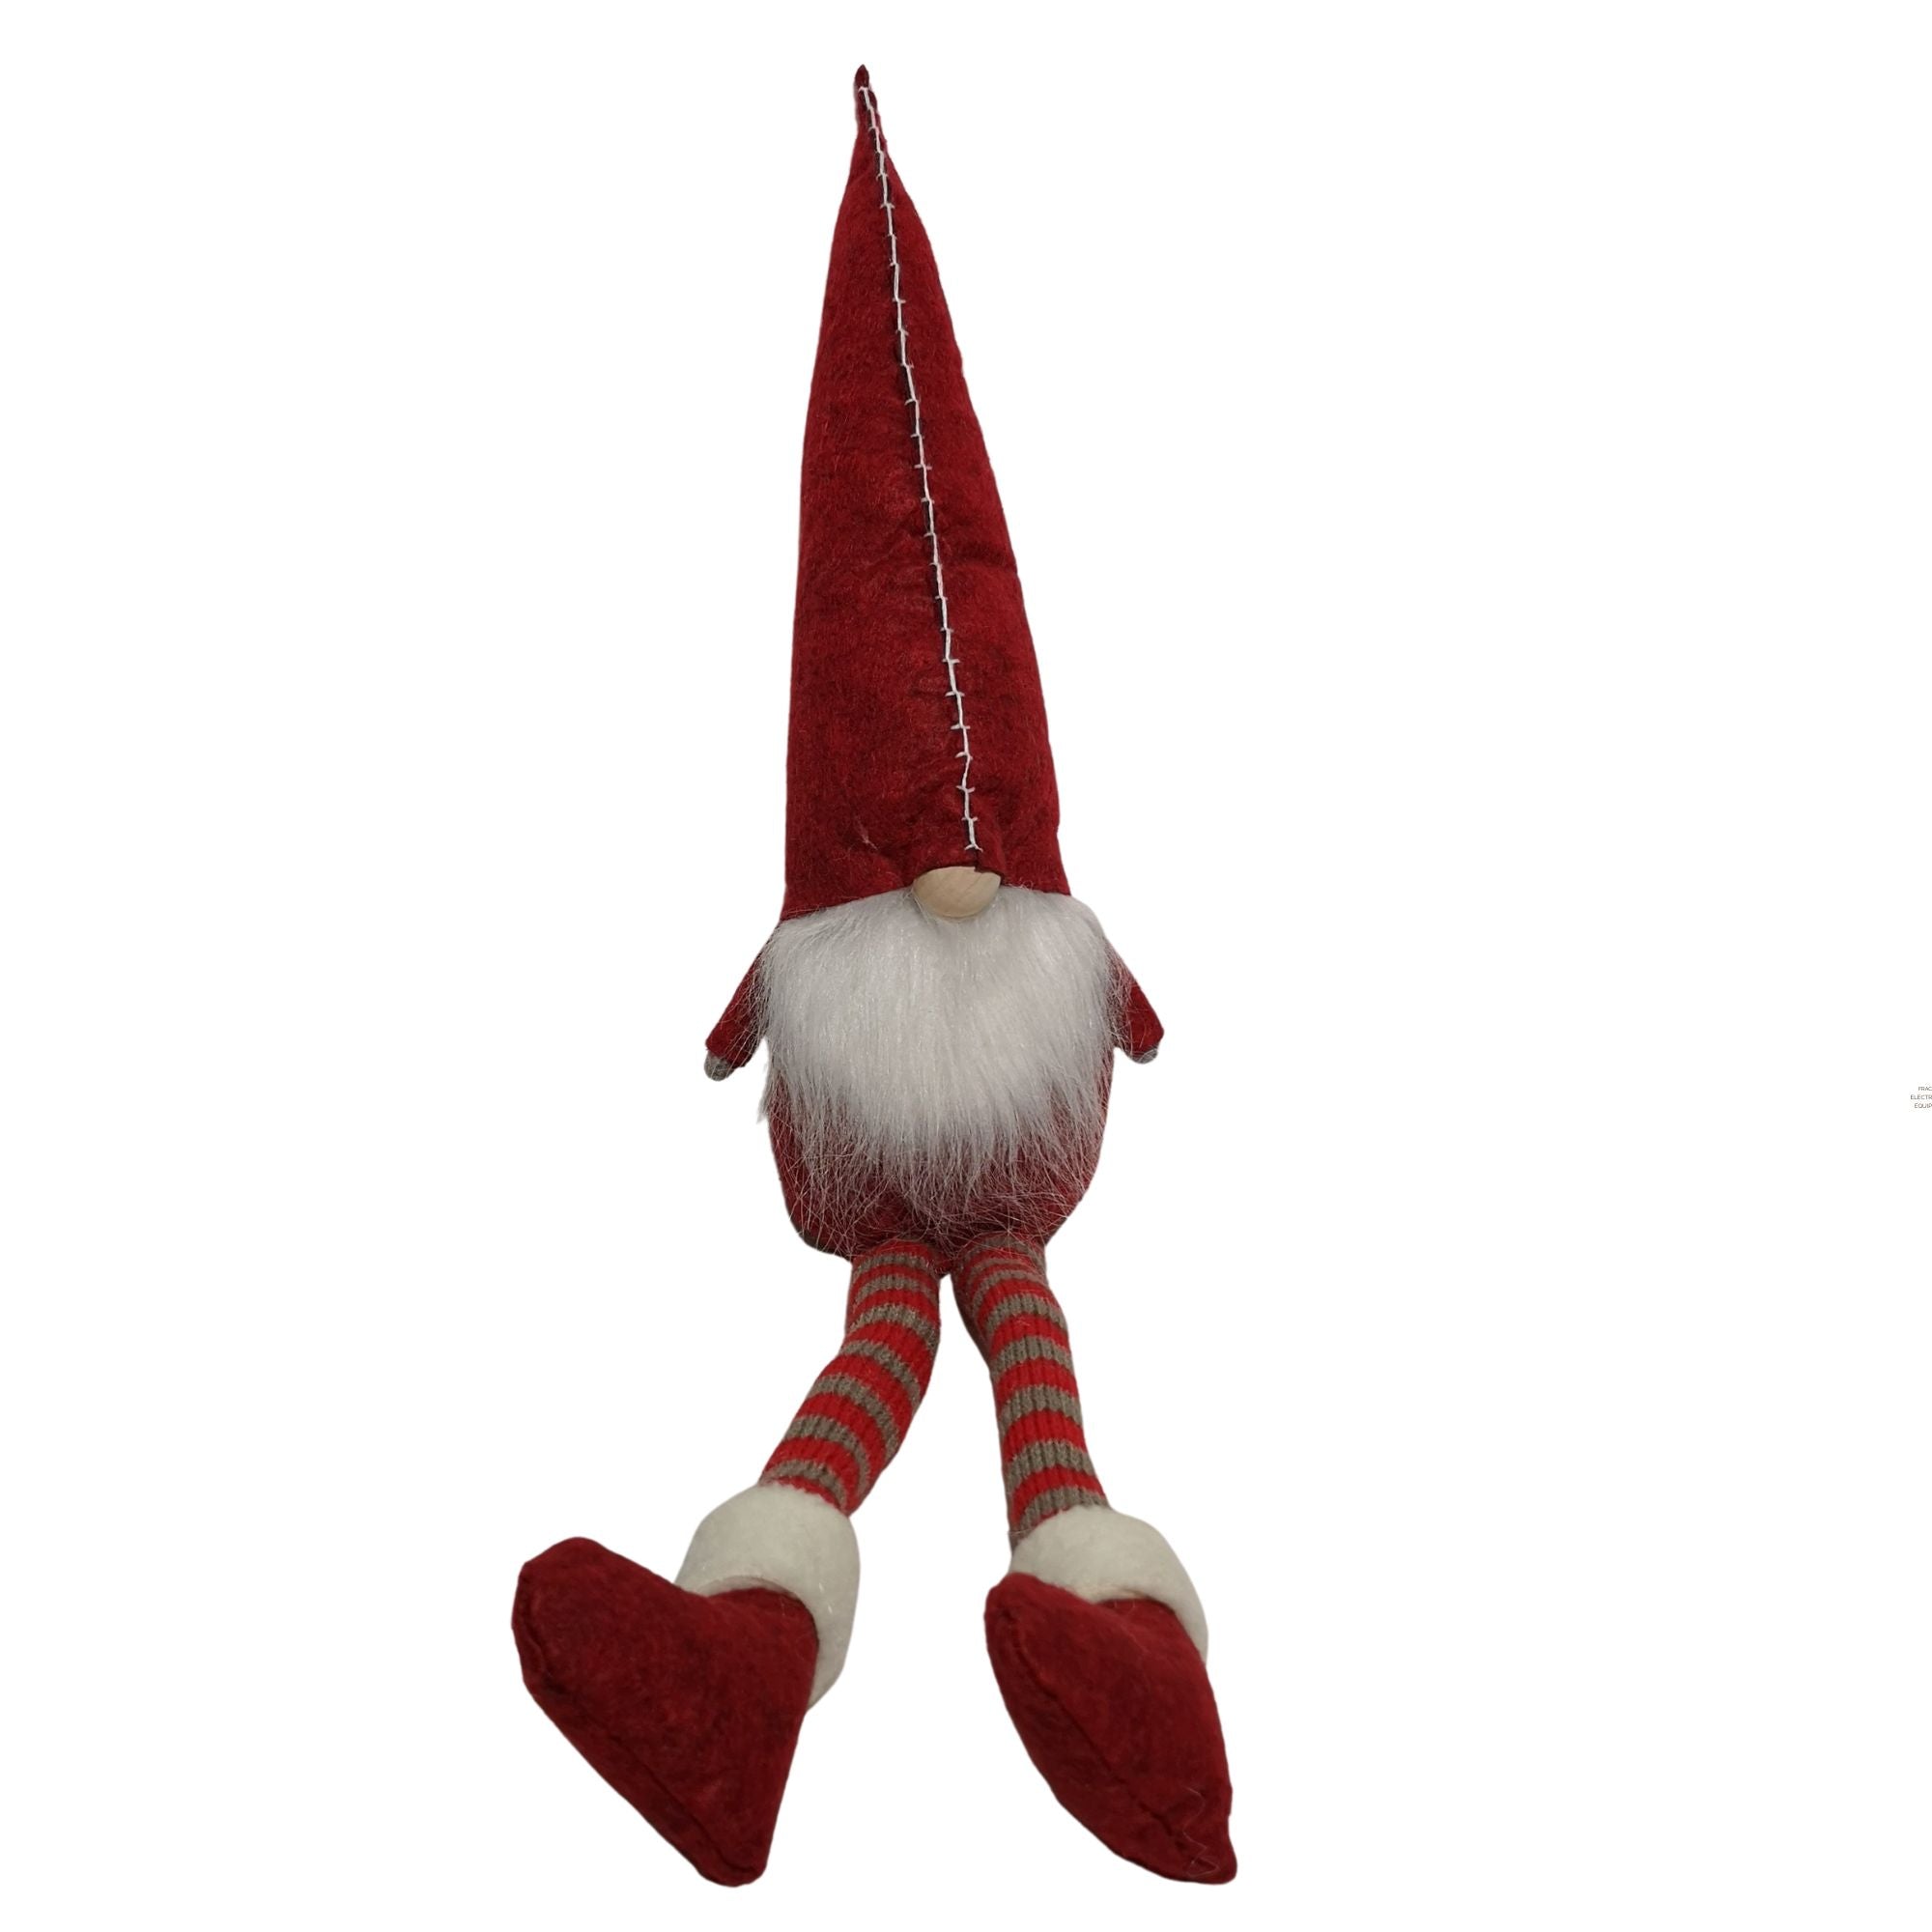 58cm Sitting Plush Christmas Santa Gonk with Dangly Legs in Red